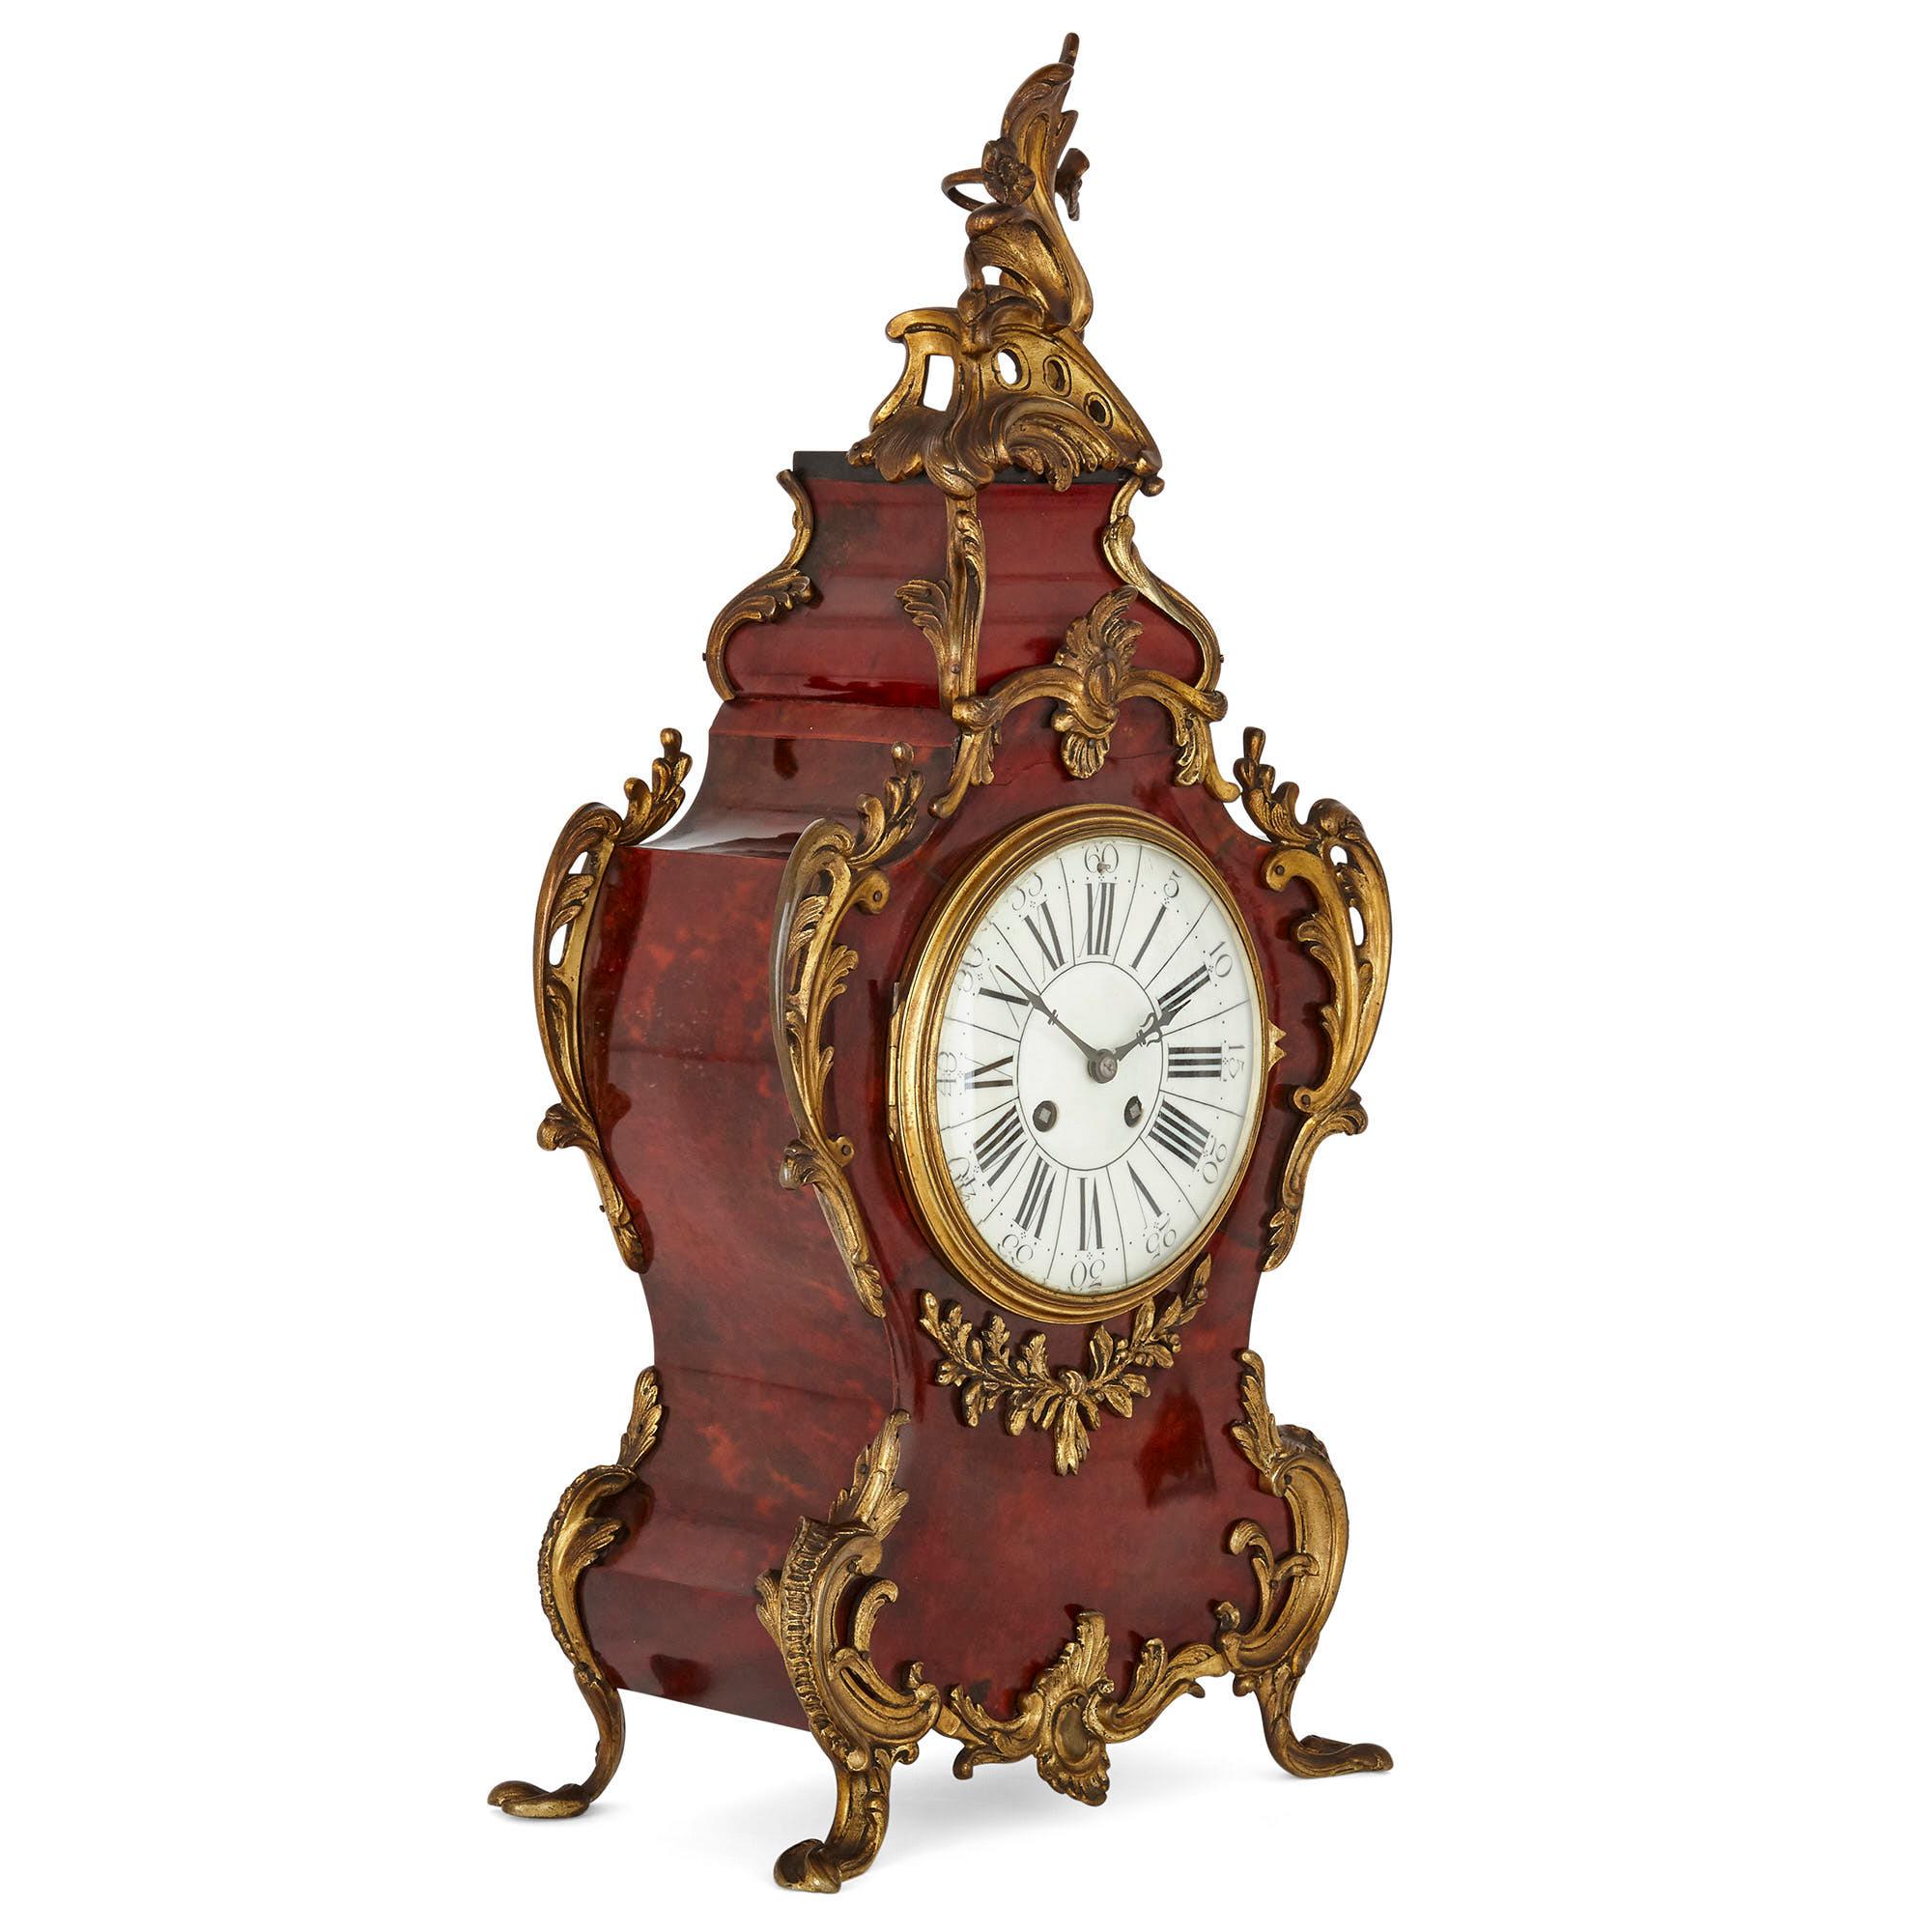 French three-piece tortoiseshell and gilt bronze clock set
French, late 19th century
Clock: Height 55cm, width 26cm, depth 15cm
Candelabra: Height 46cm, width 22cm, depth 20cm

Comprised of a mantel clock and a pair of flanking candelabra, this